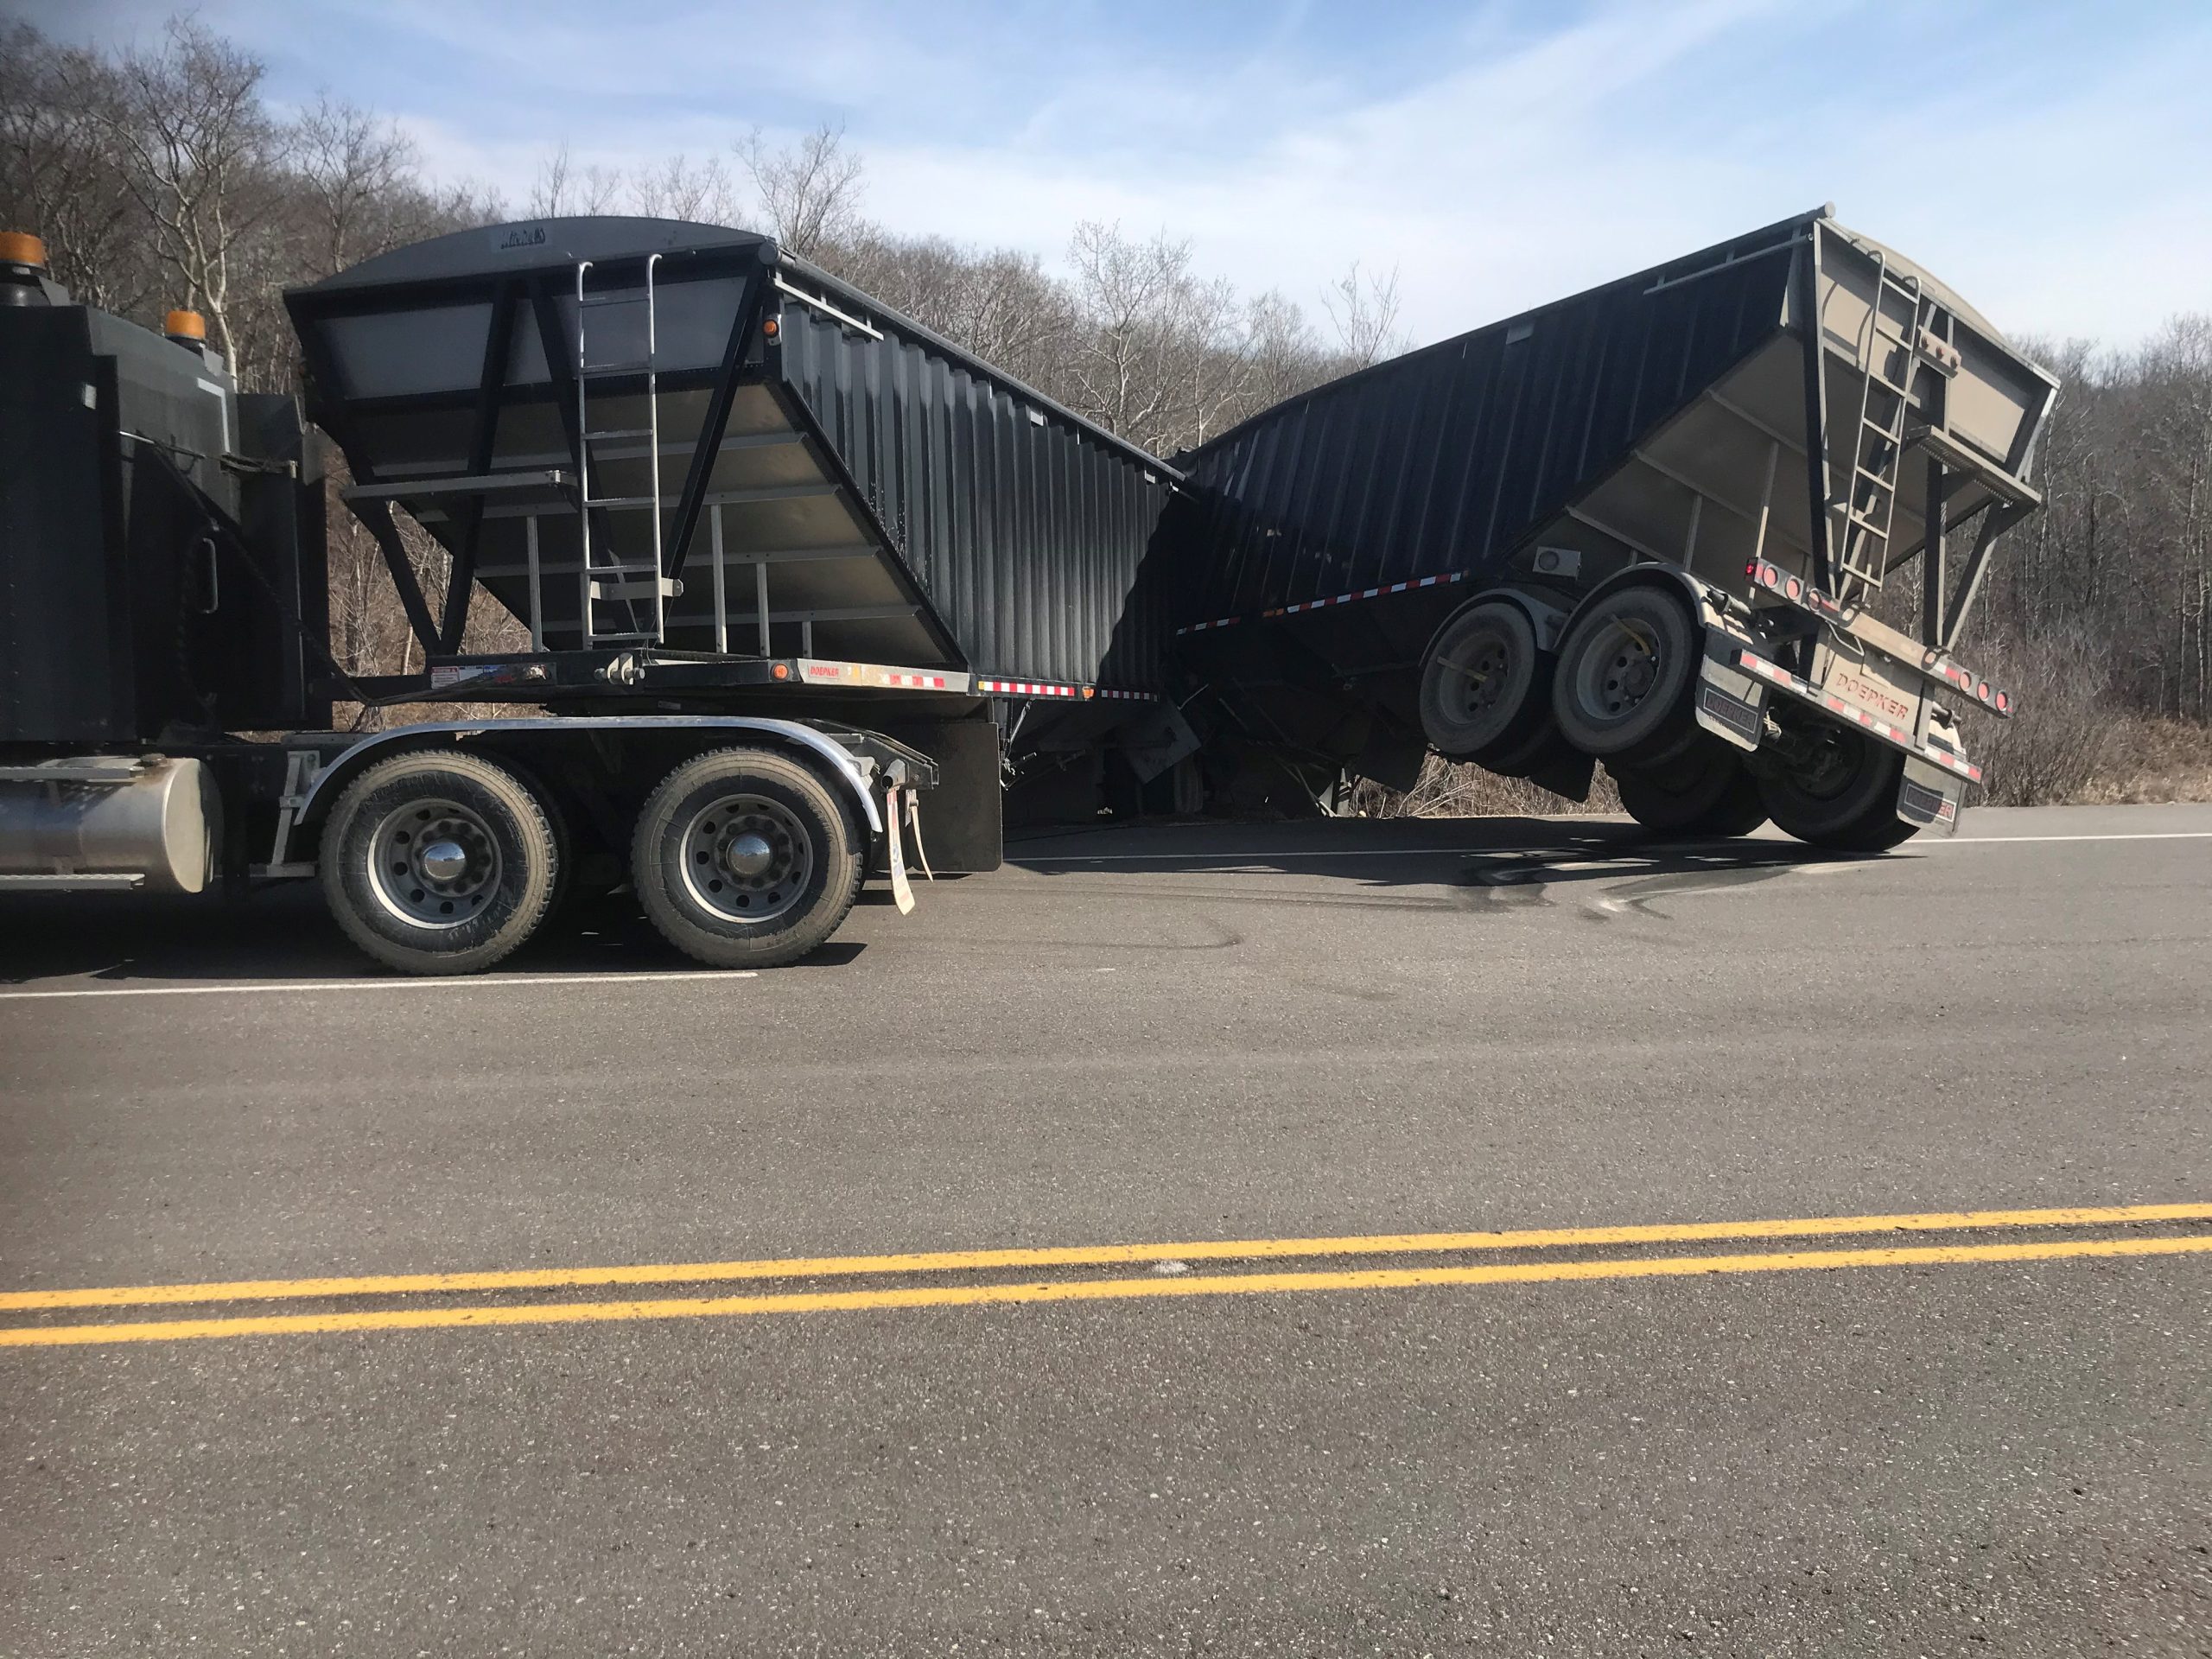 Bent and crashed semi trailer